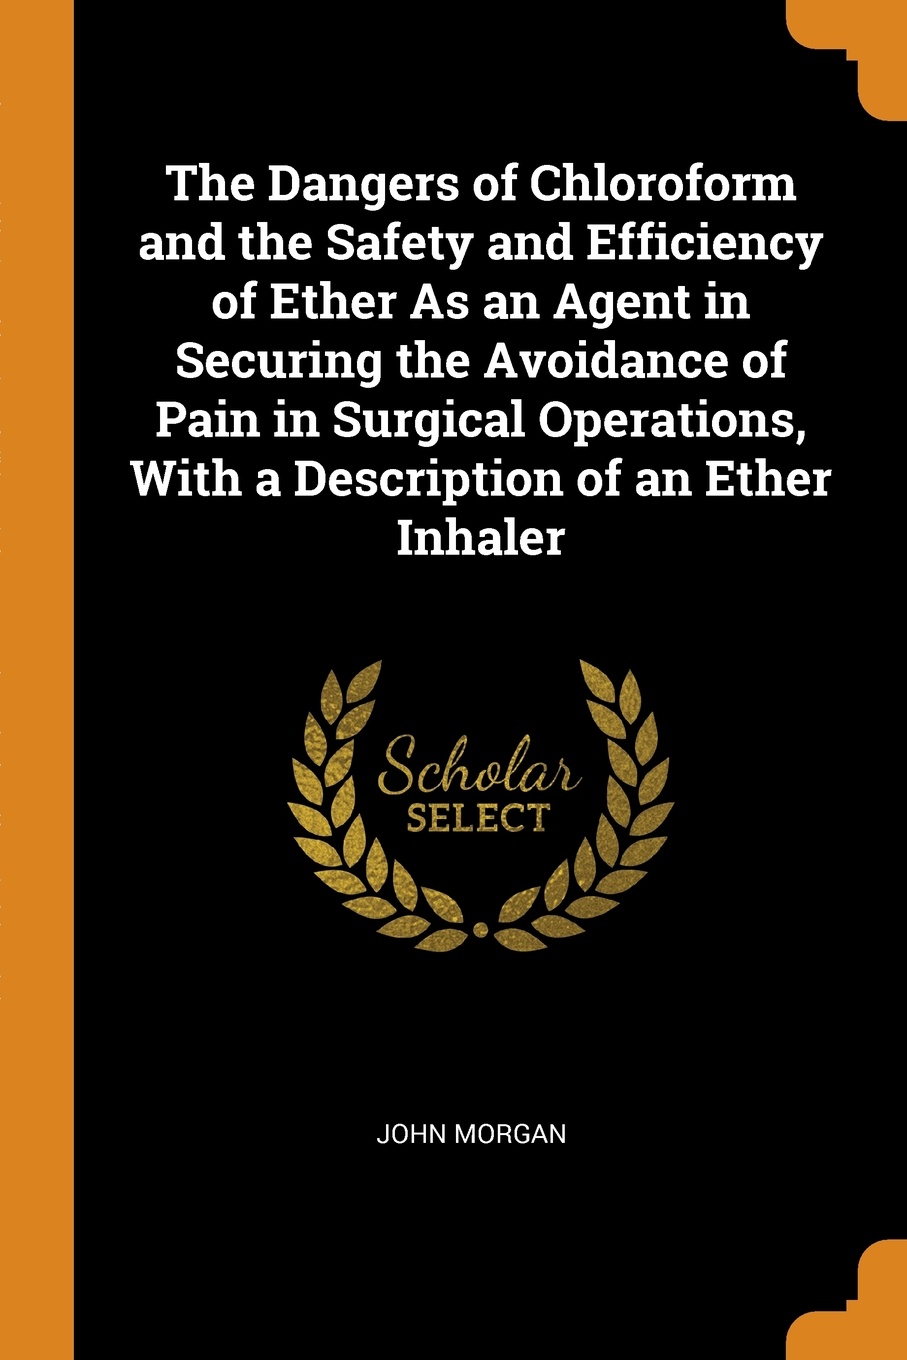 The Dangers of Chloroform and the Safety and Efficiency of Ether As an Agent in Securing the Avoidance of Pain in Surgical Operations, With a Description of an Ether Inhaler